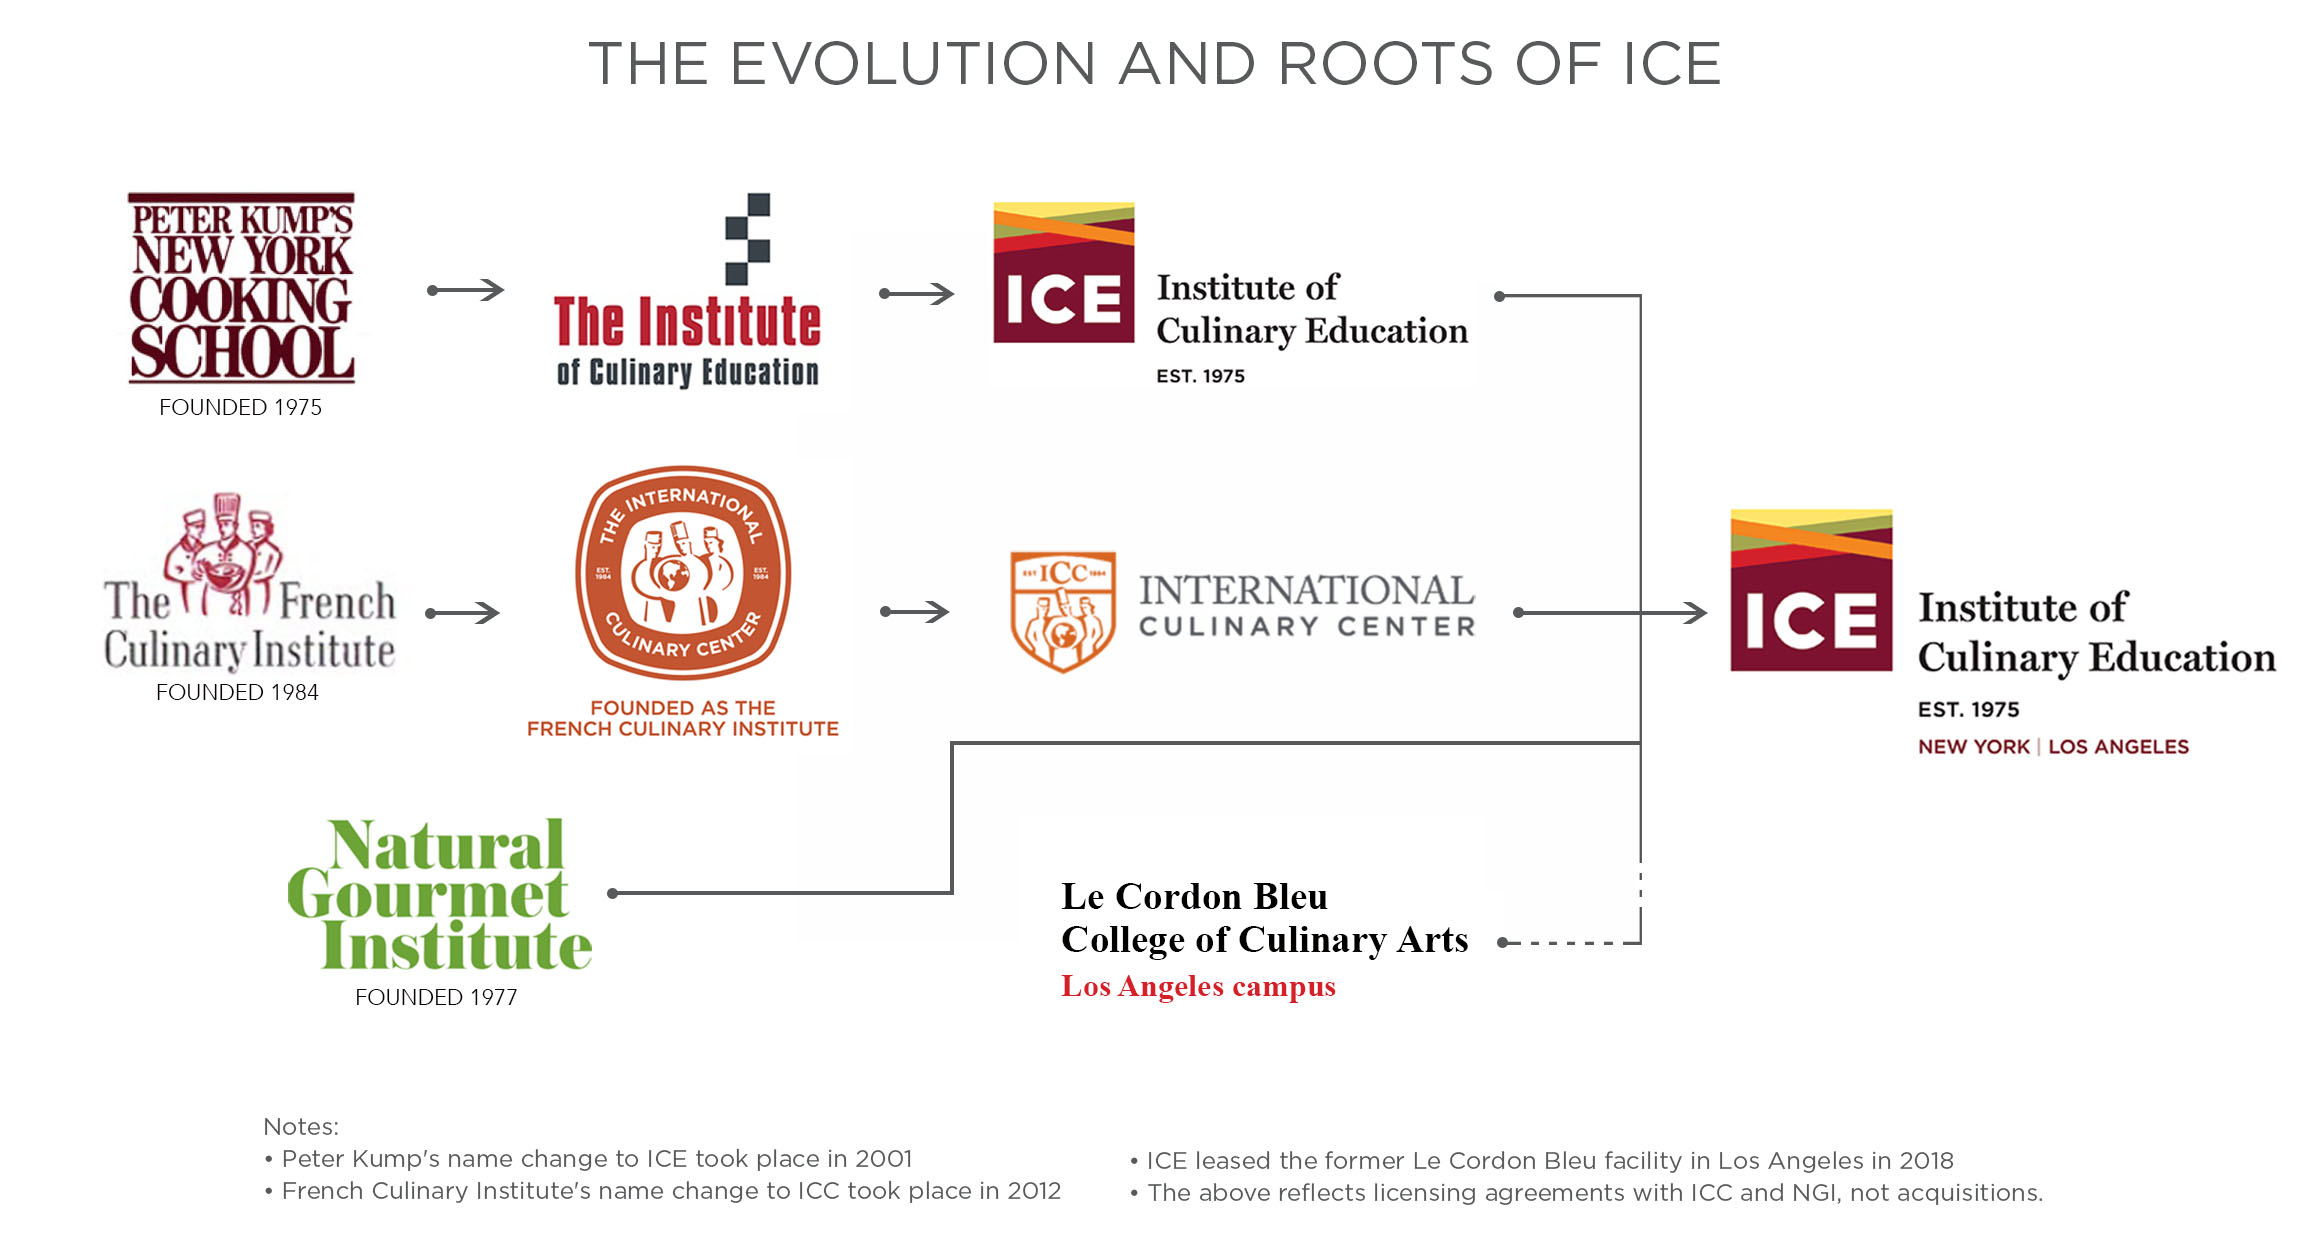 The evolution of culinary schools in New York and LA